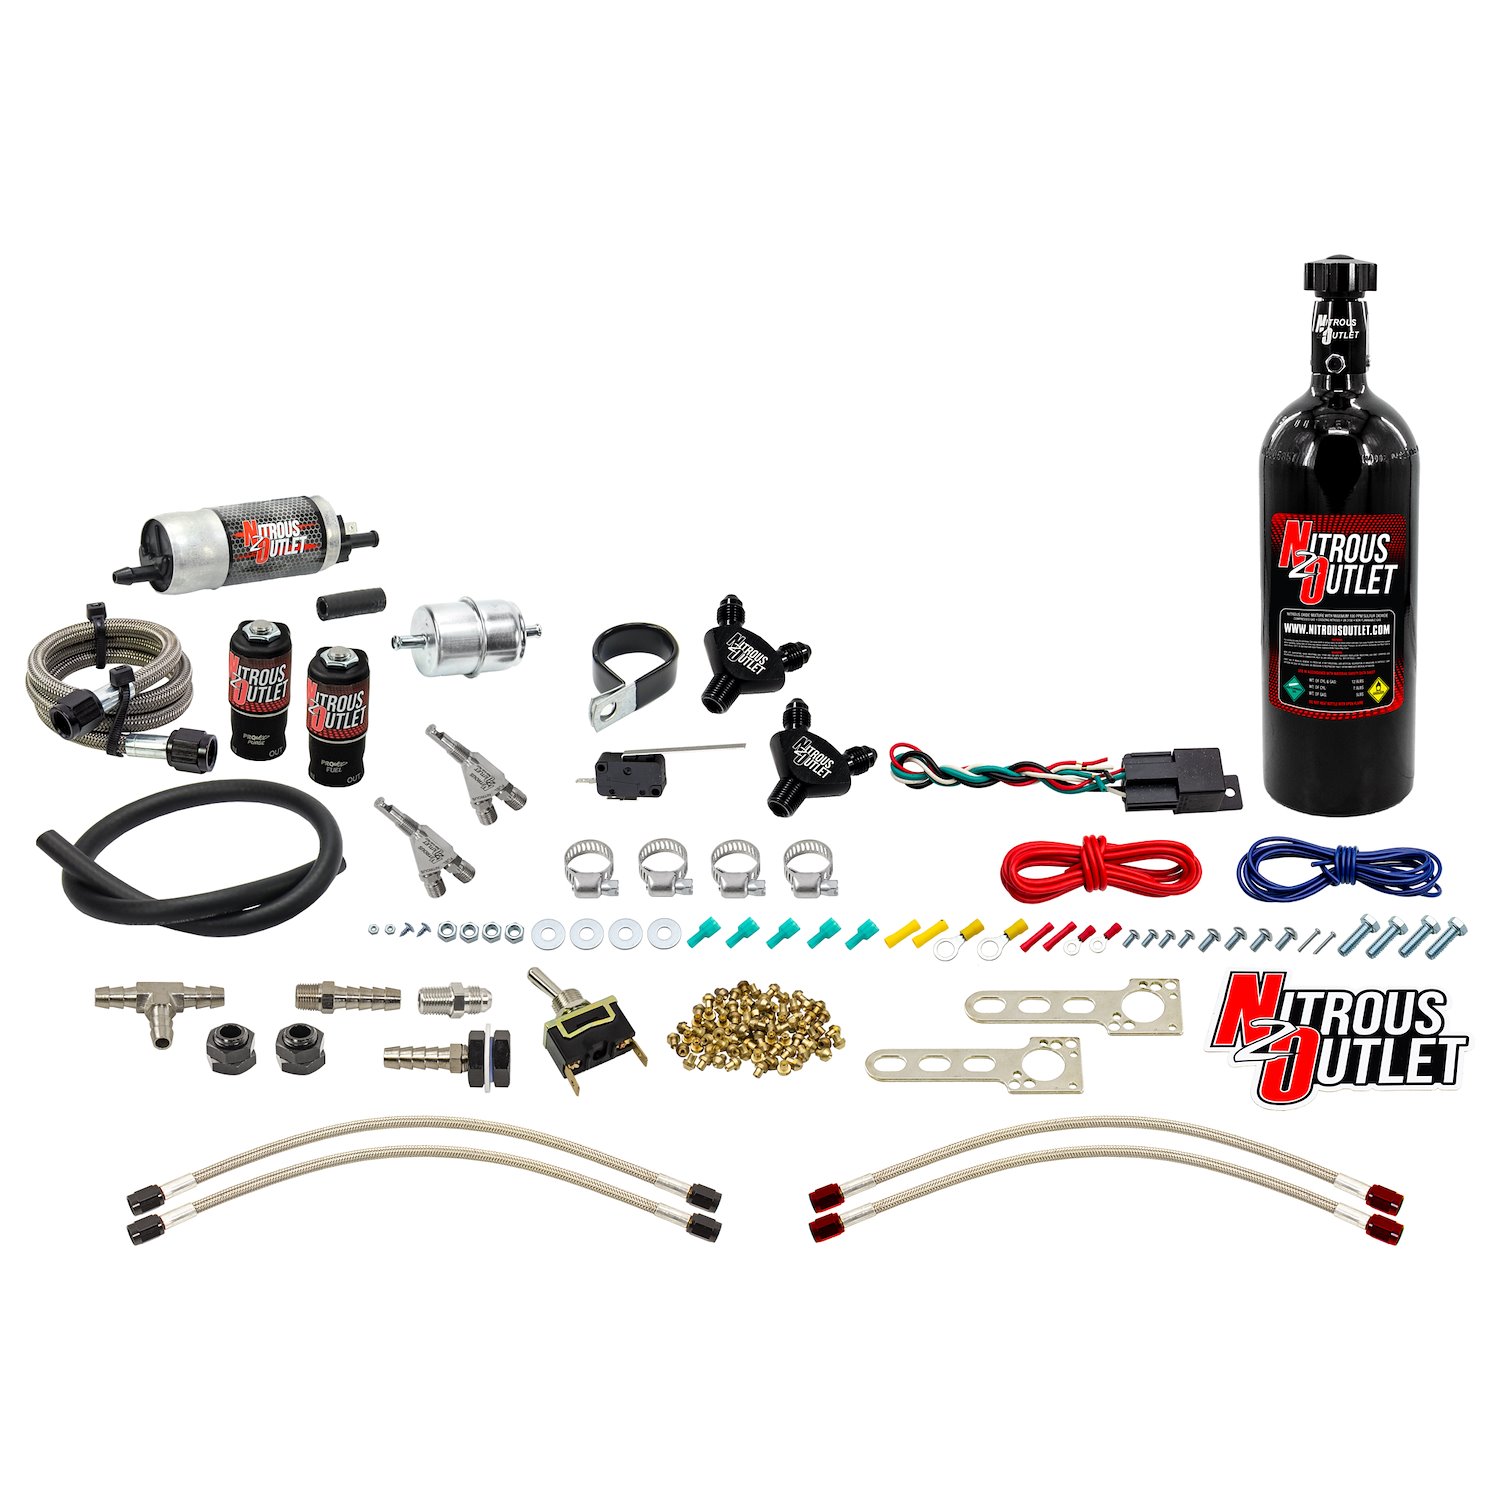 50-10022-5 Powersports Twin-Cyl Wet Nozzle System, Stainless 90-Degree Nozzles, Gas, 6 psi, 2030405060 HP, 5LB Bottle